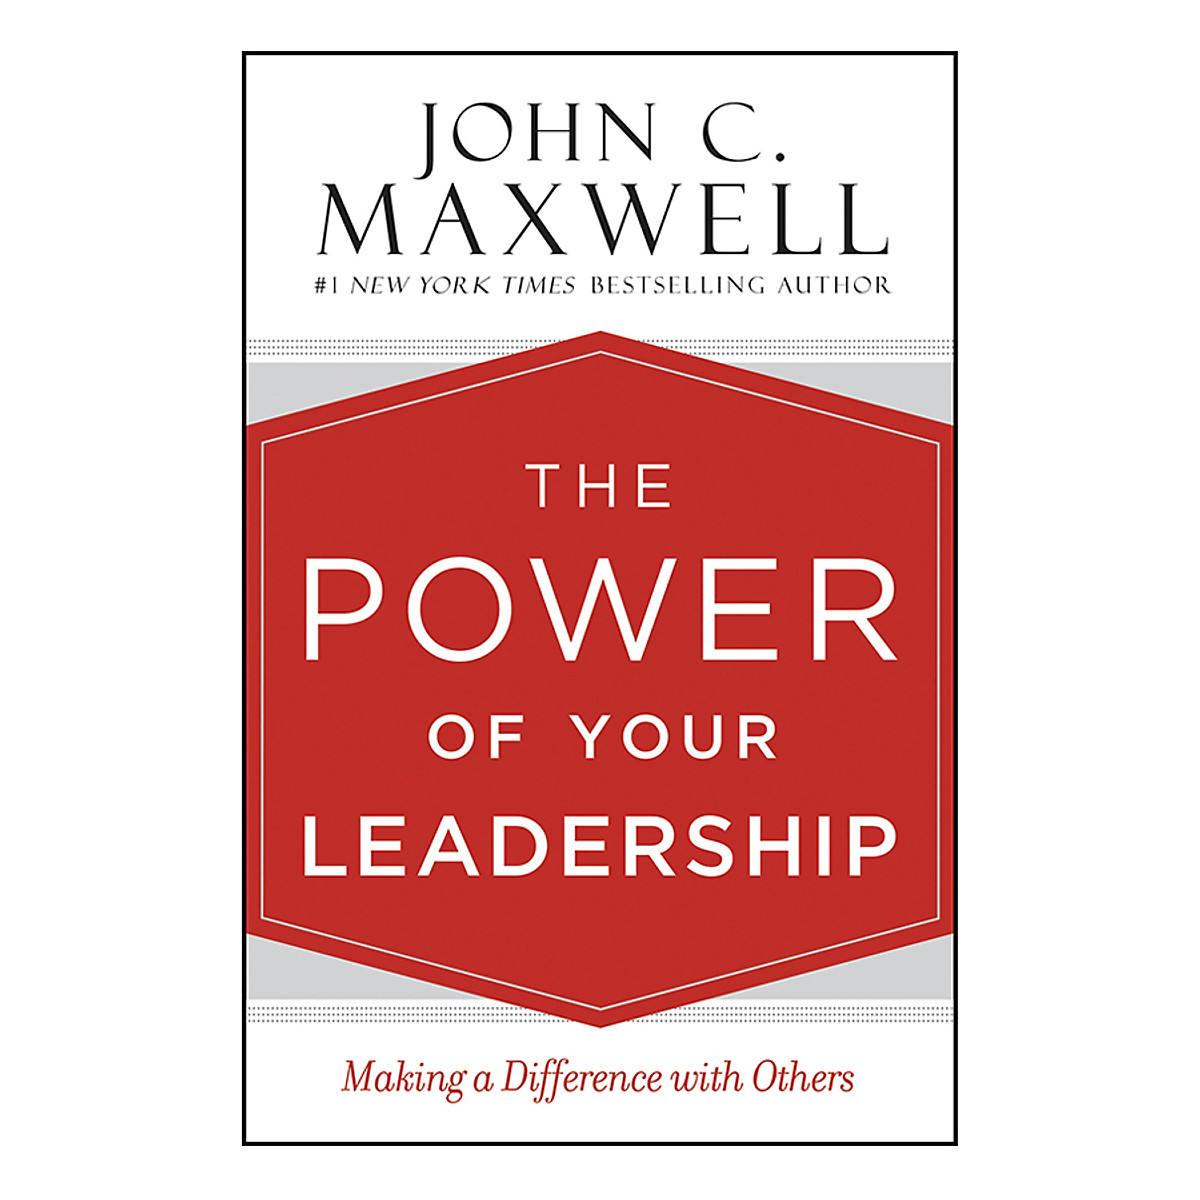 The Power of Your Leadership: Making a Difference With Others